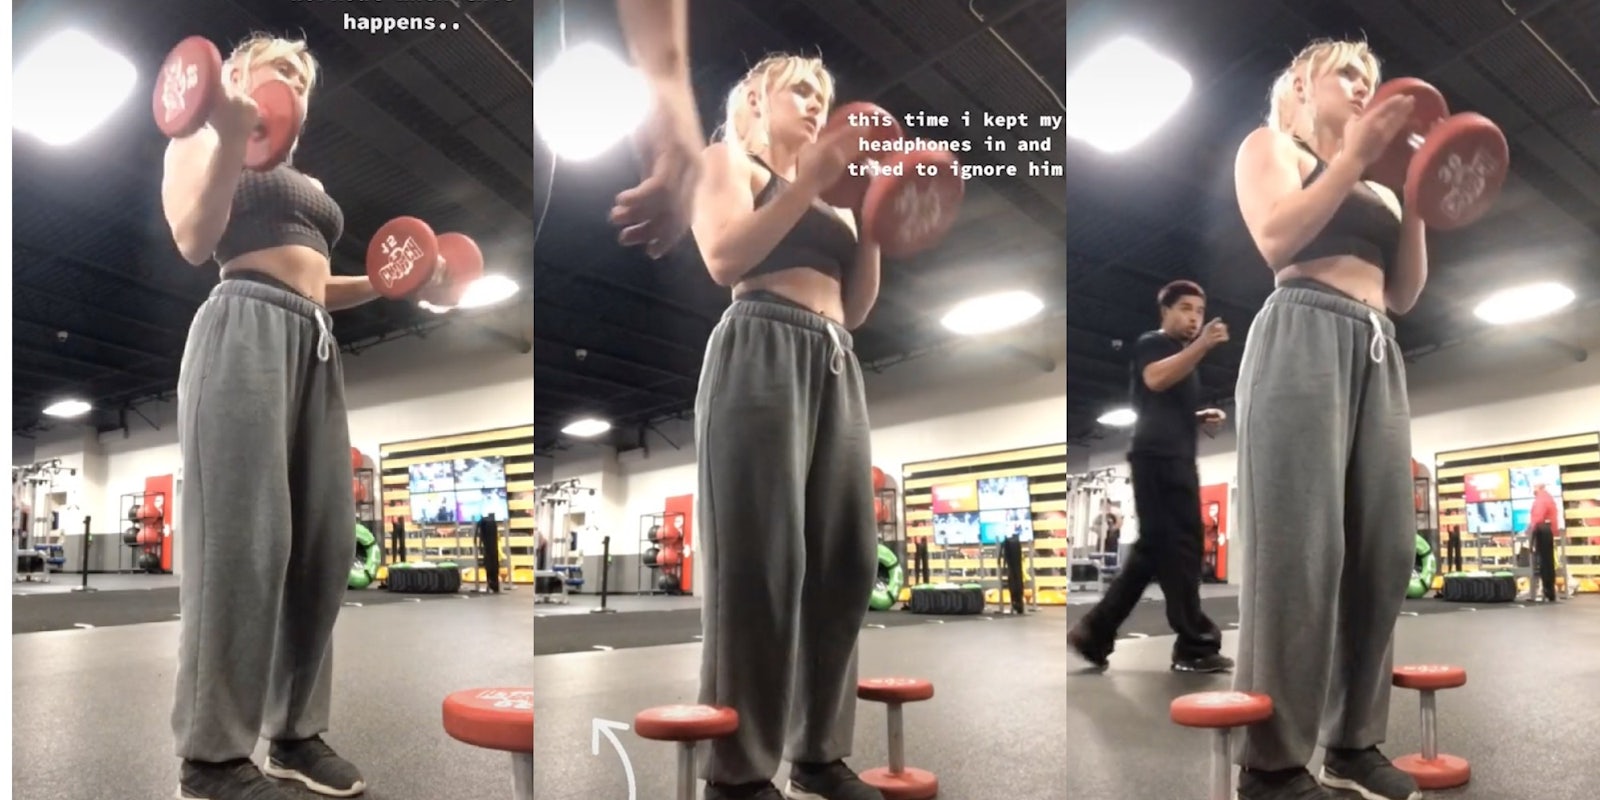 TikToker says man repeatedly harassed her at the gym.